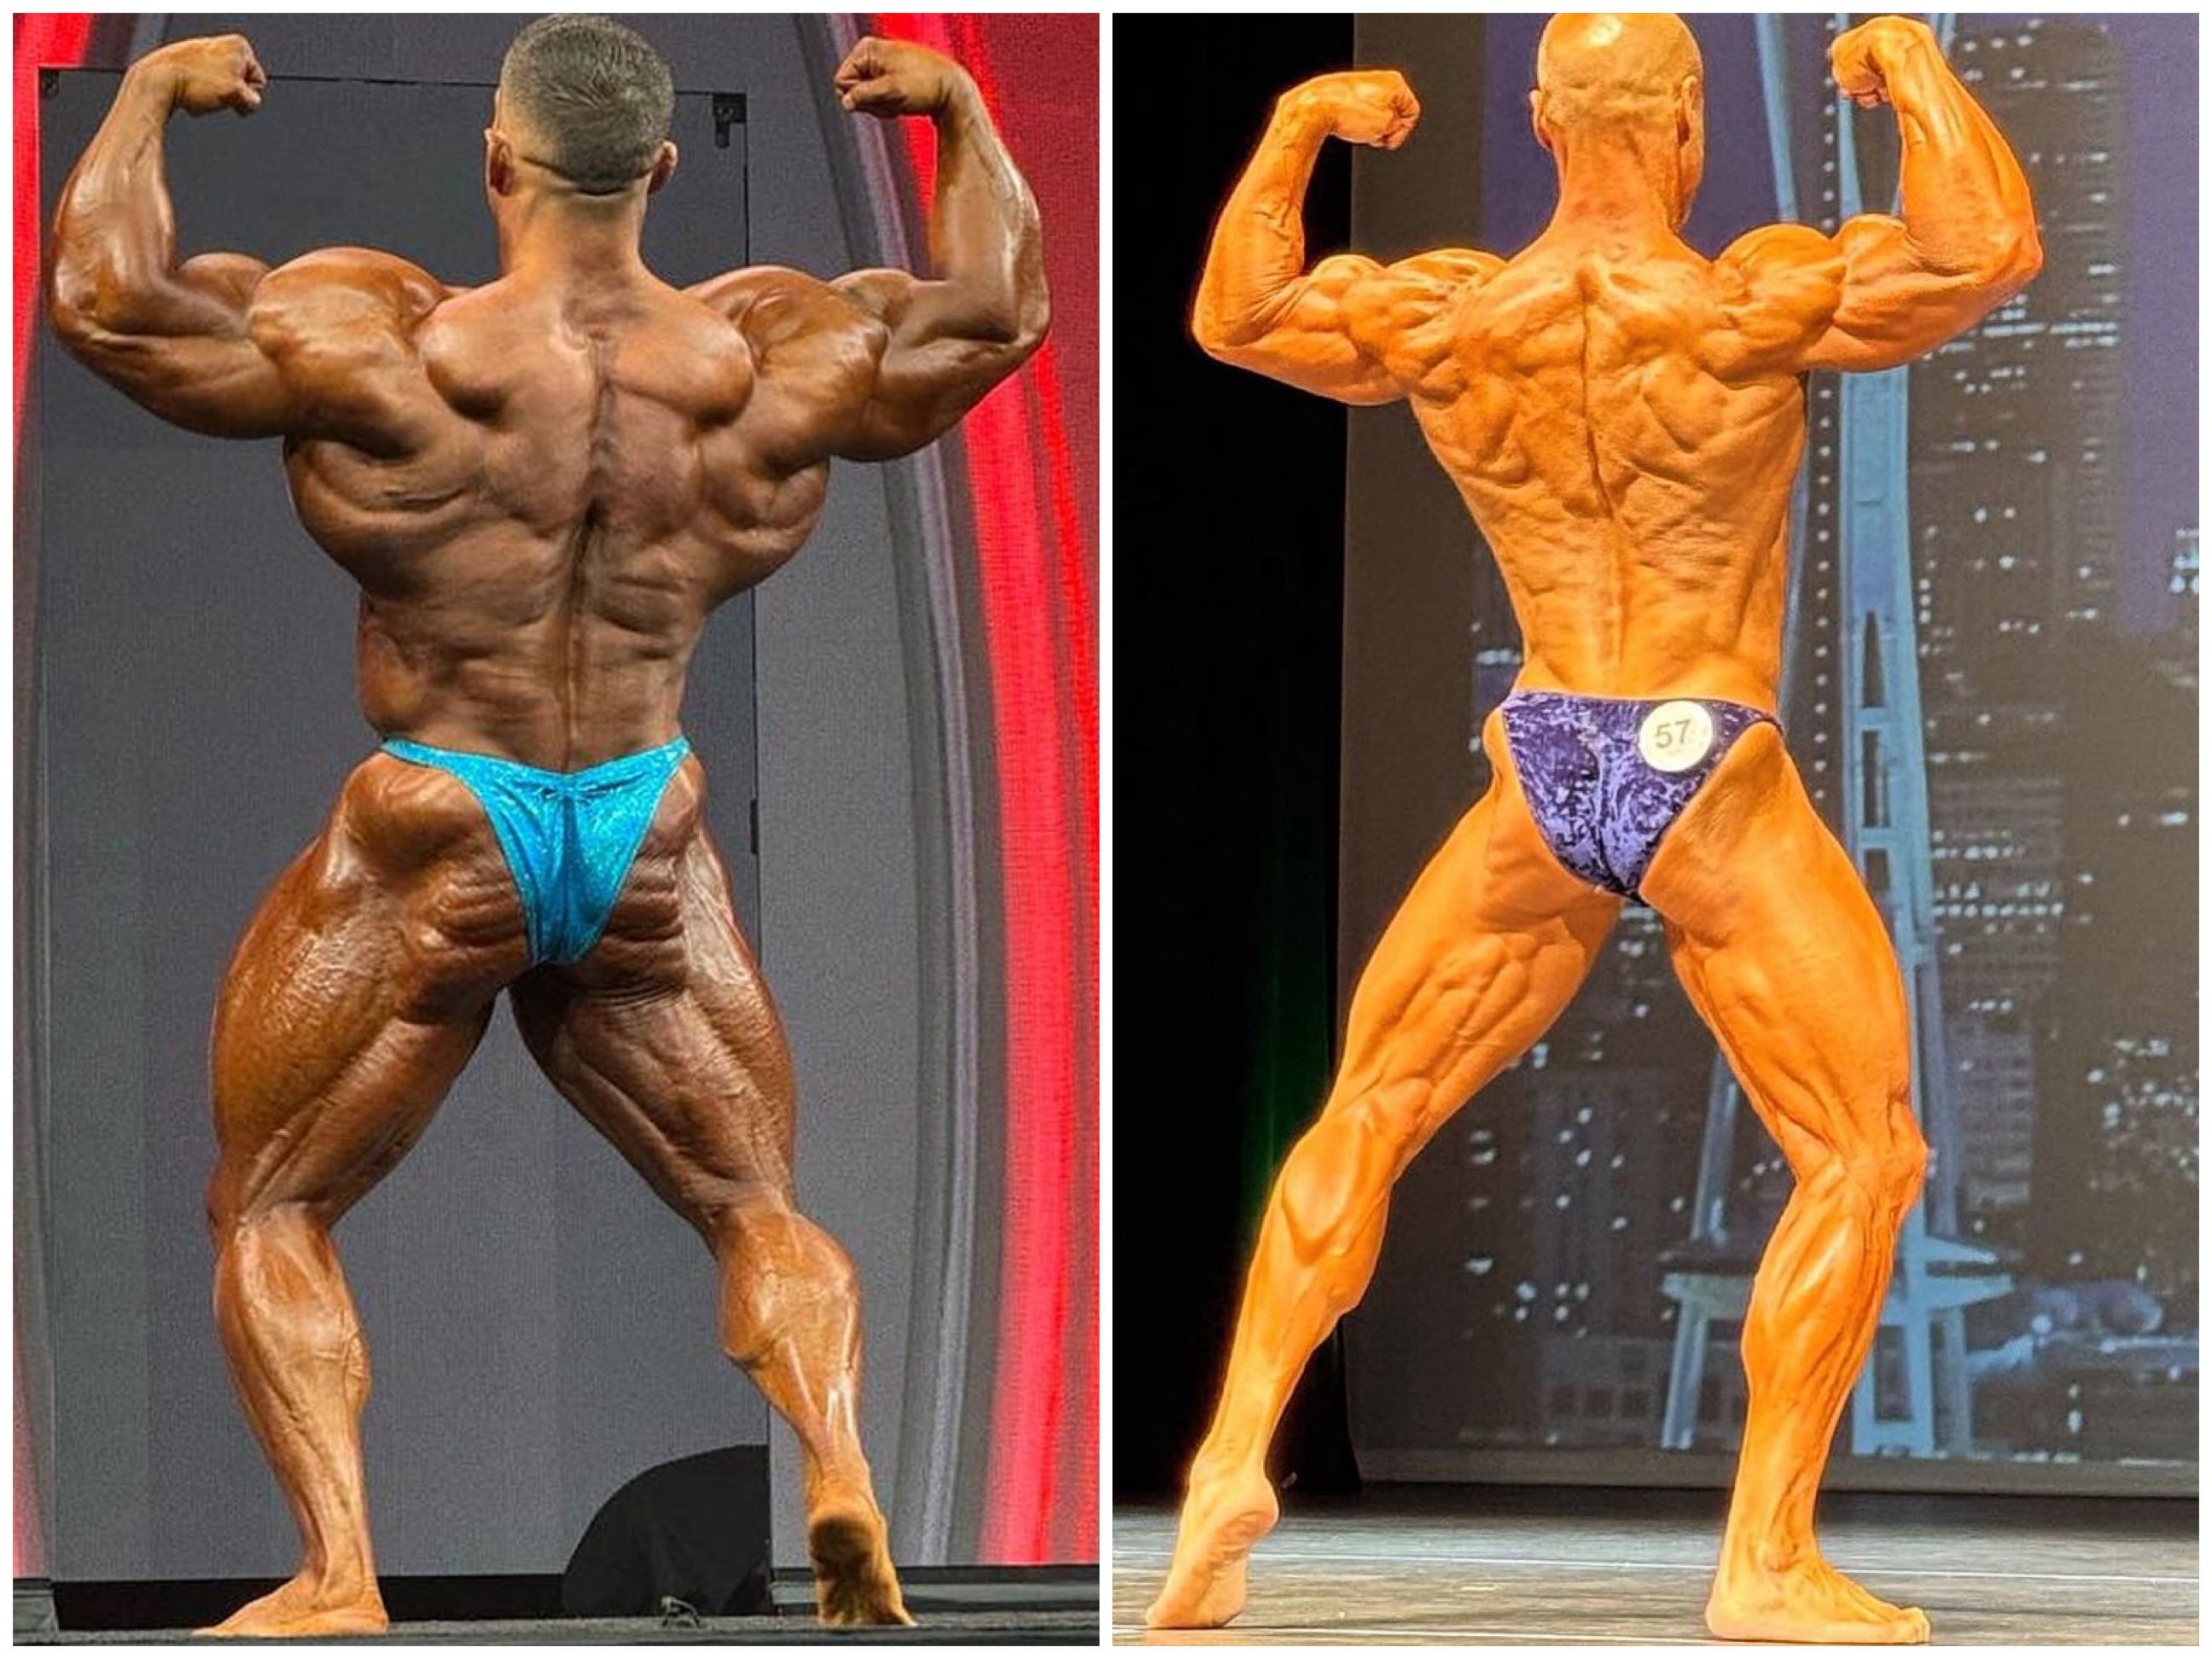 derek lunsford and jeff alberts both hitting a back double bicep pose at bodybuilding competitions